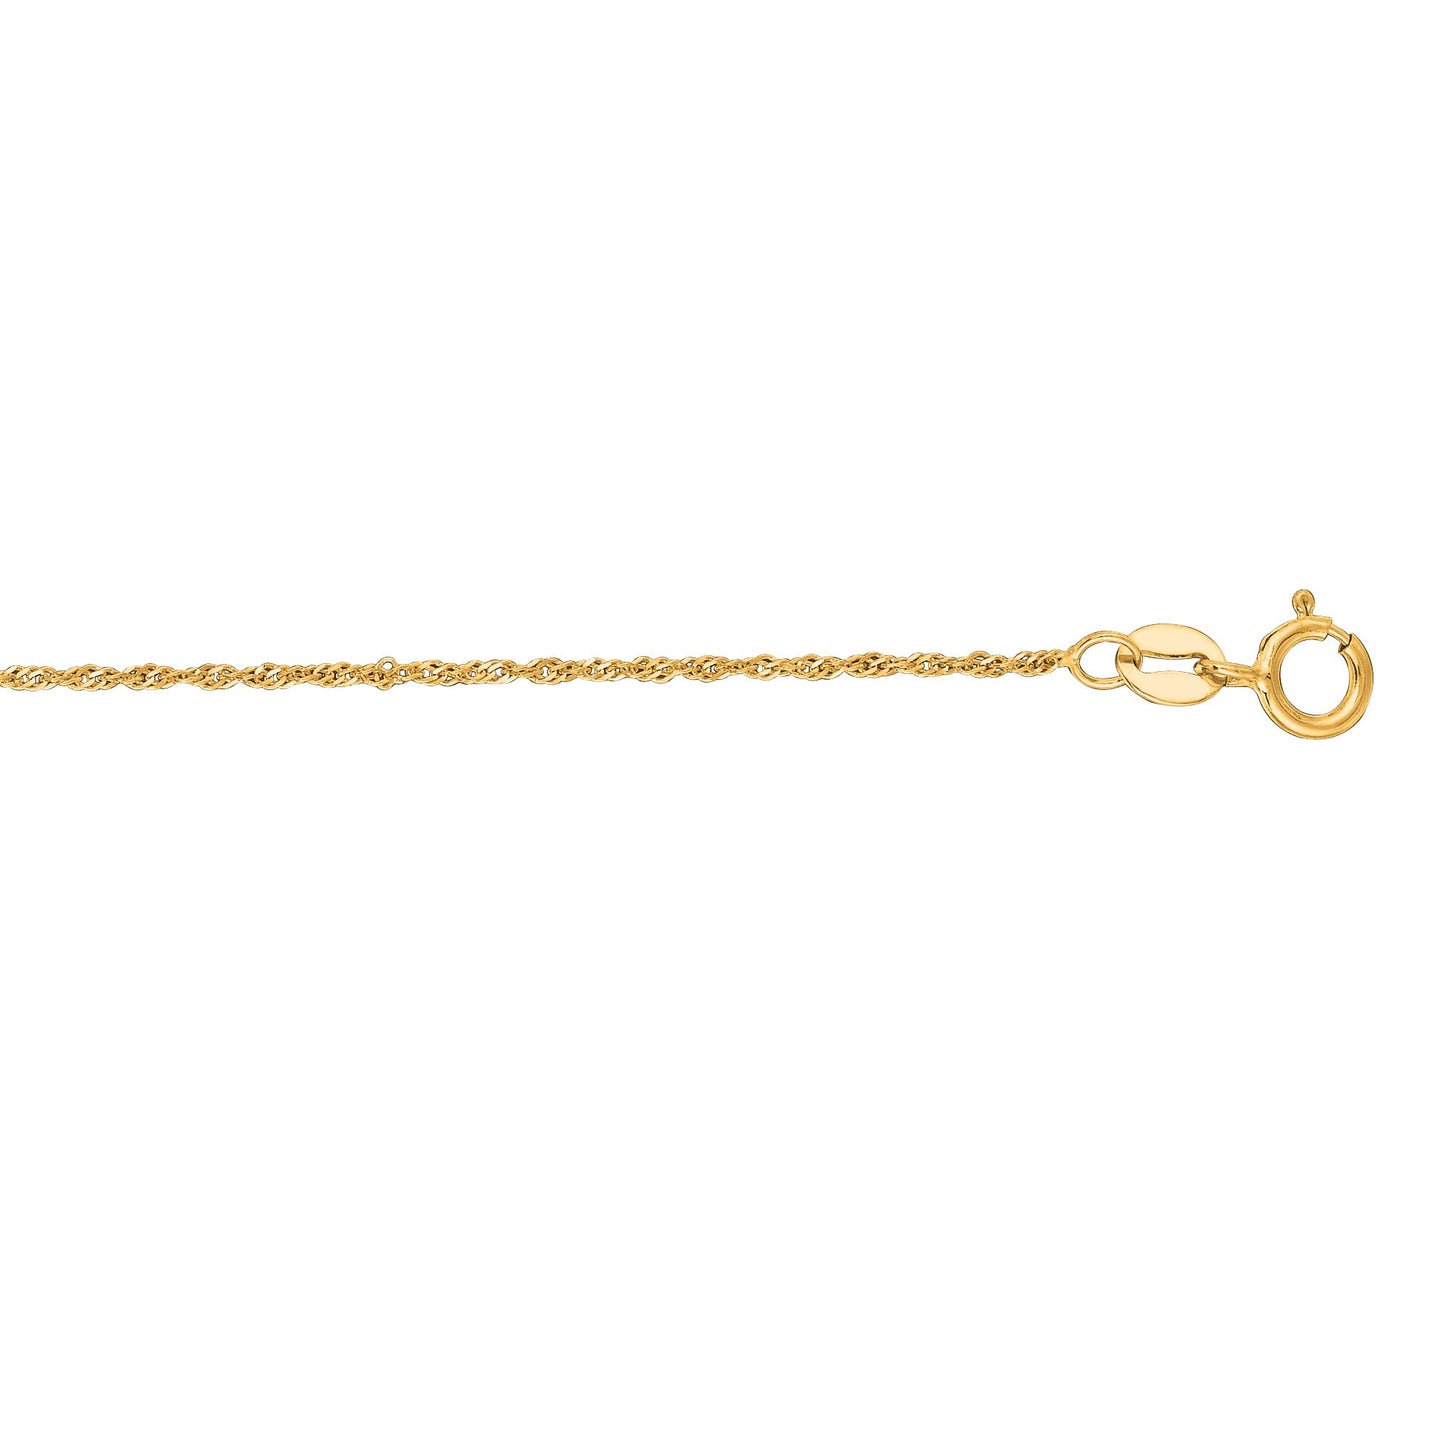 10K Gold Singapore Chain with Spring Ring